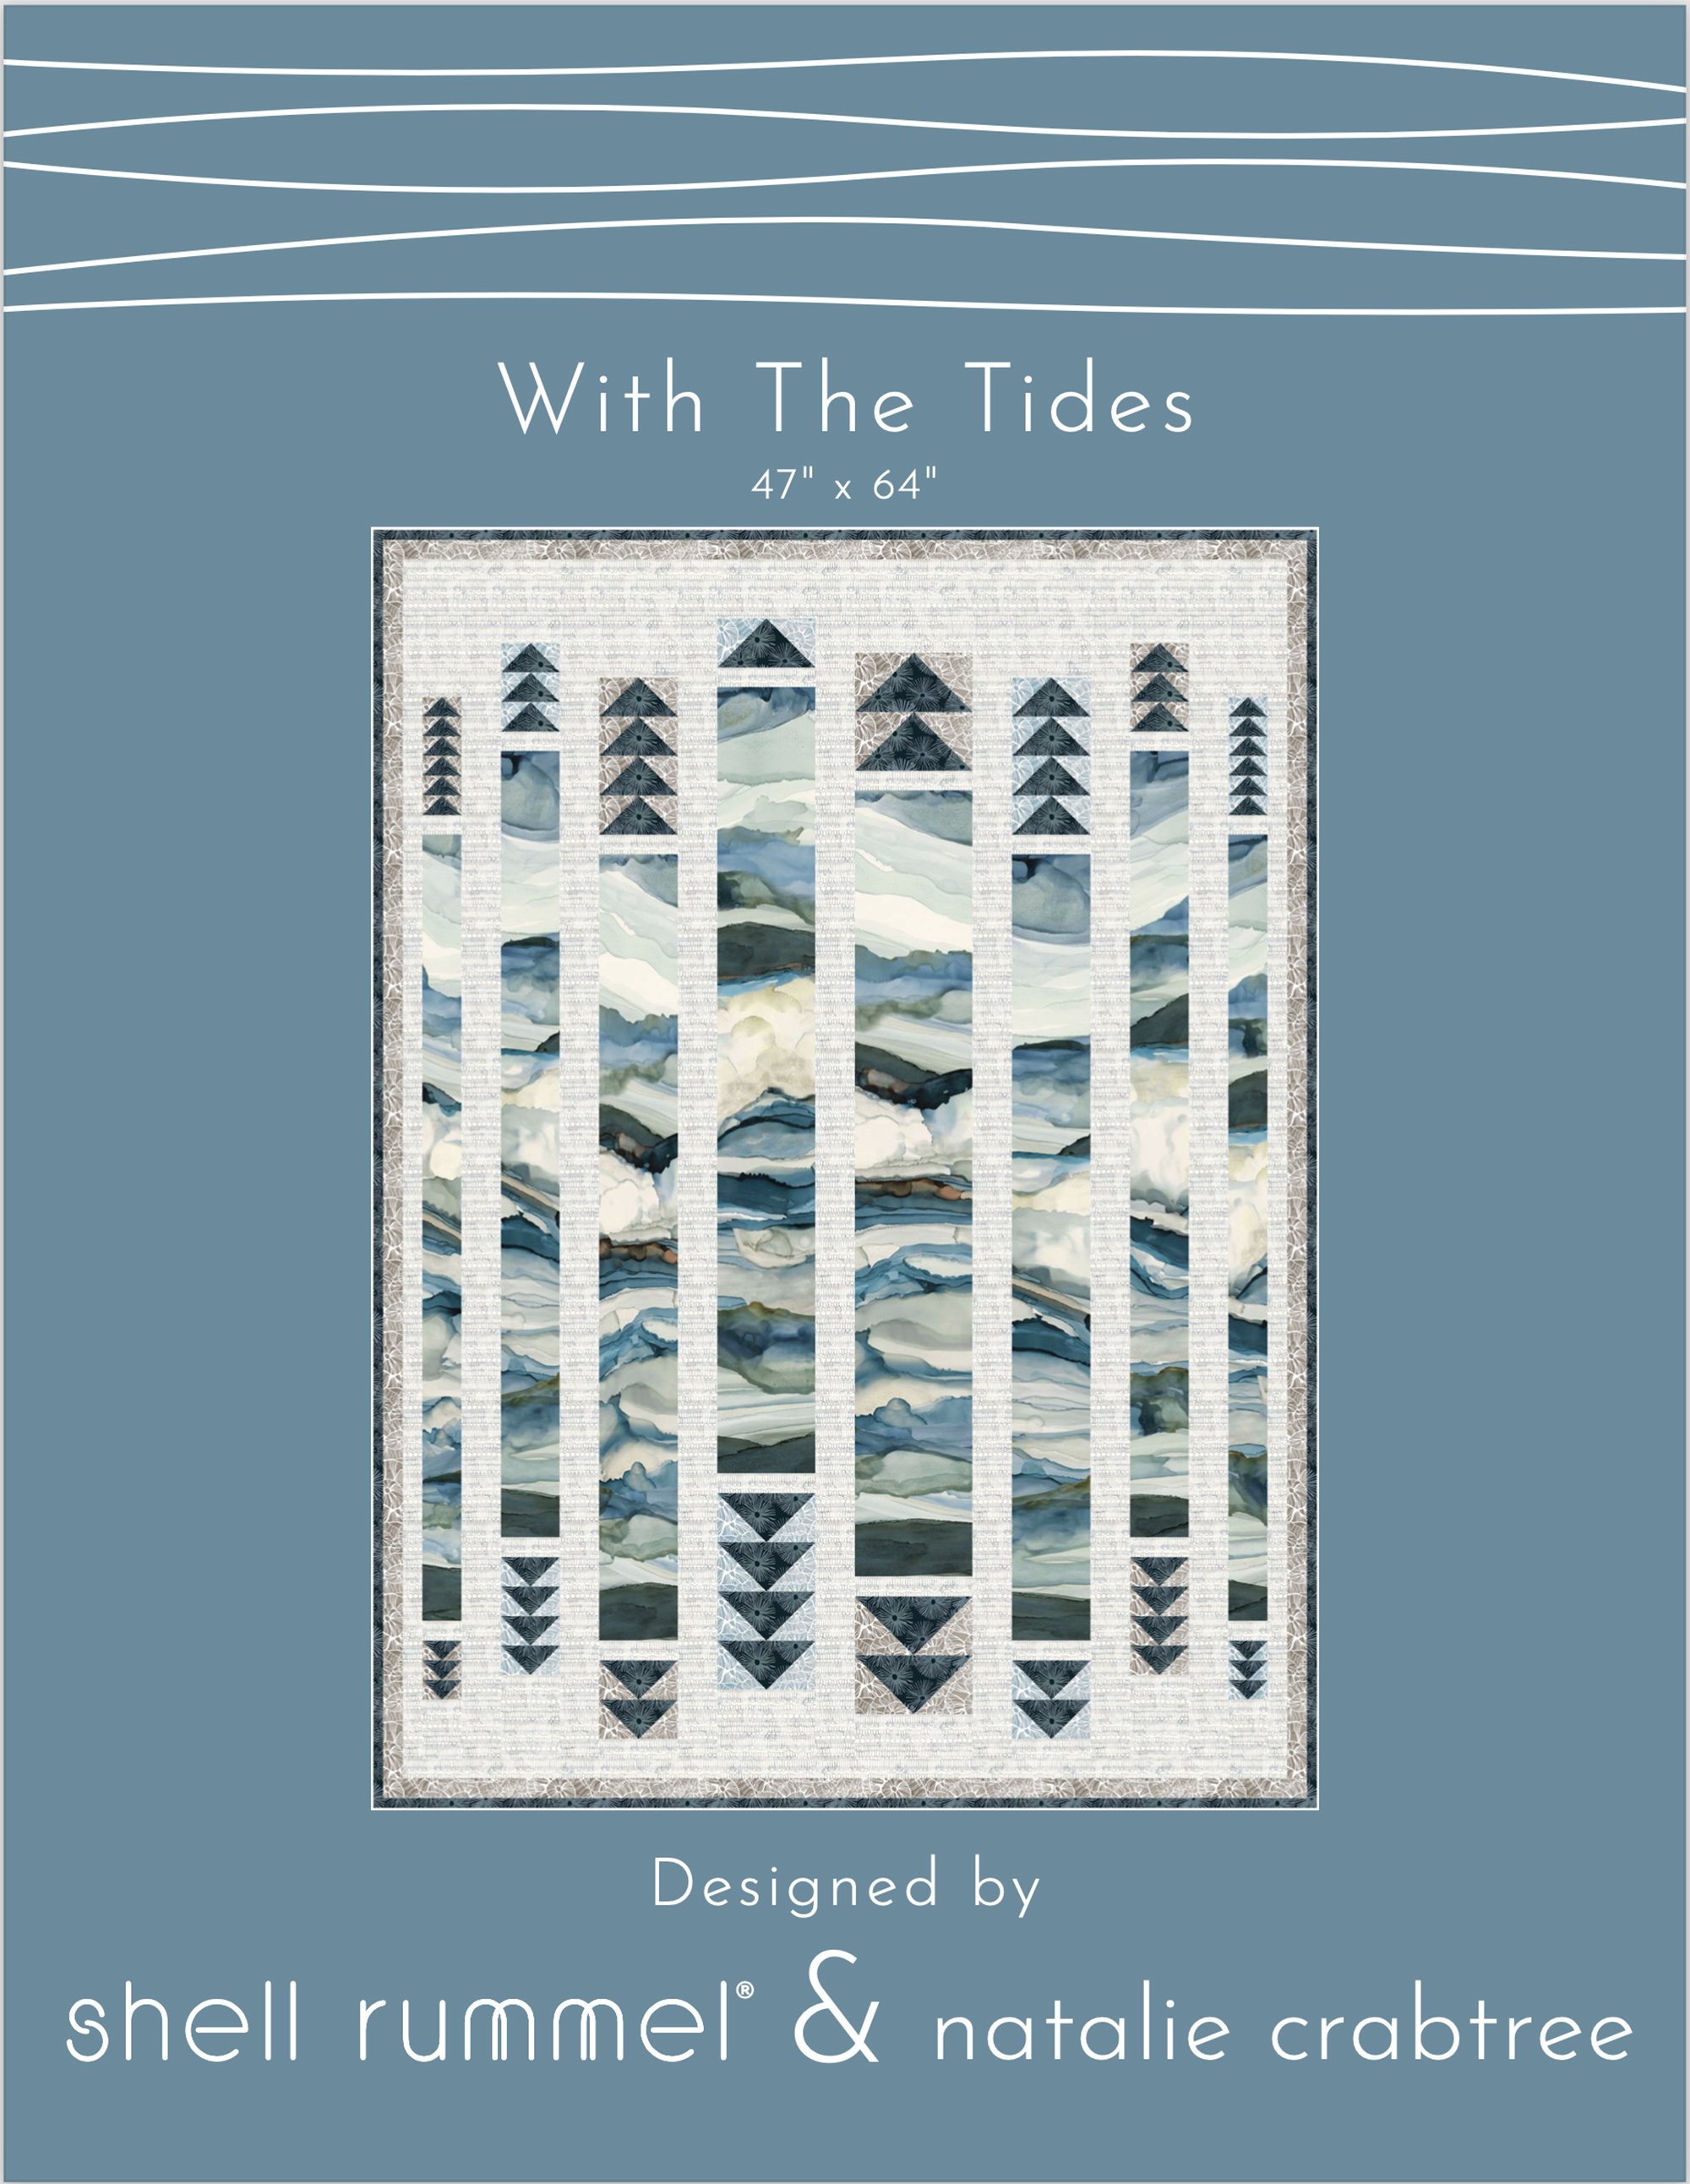 With The Tides cover.jpg